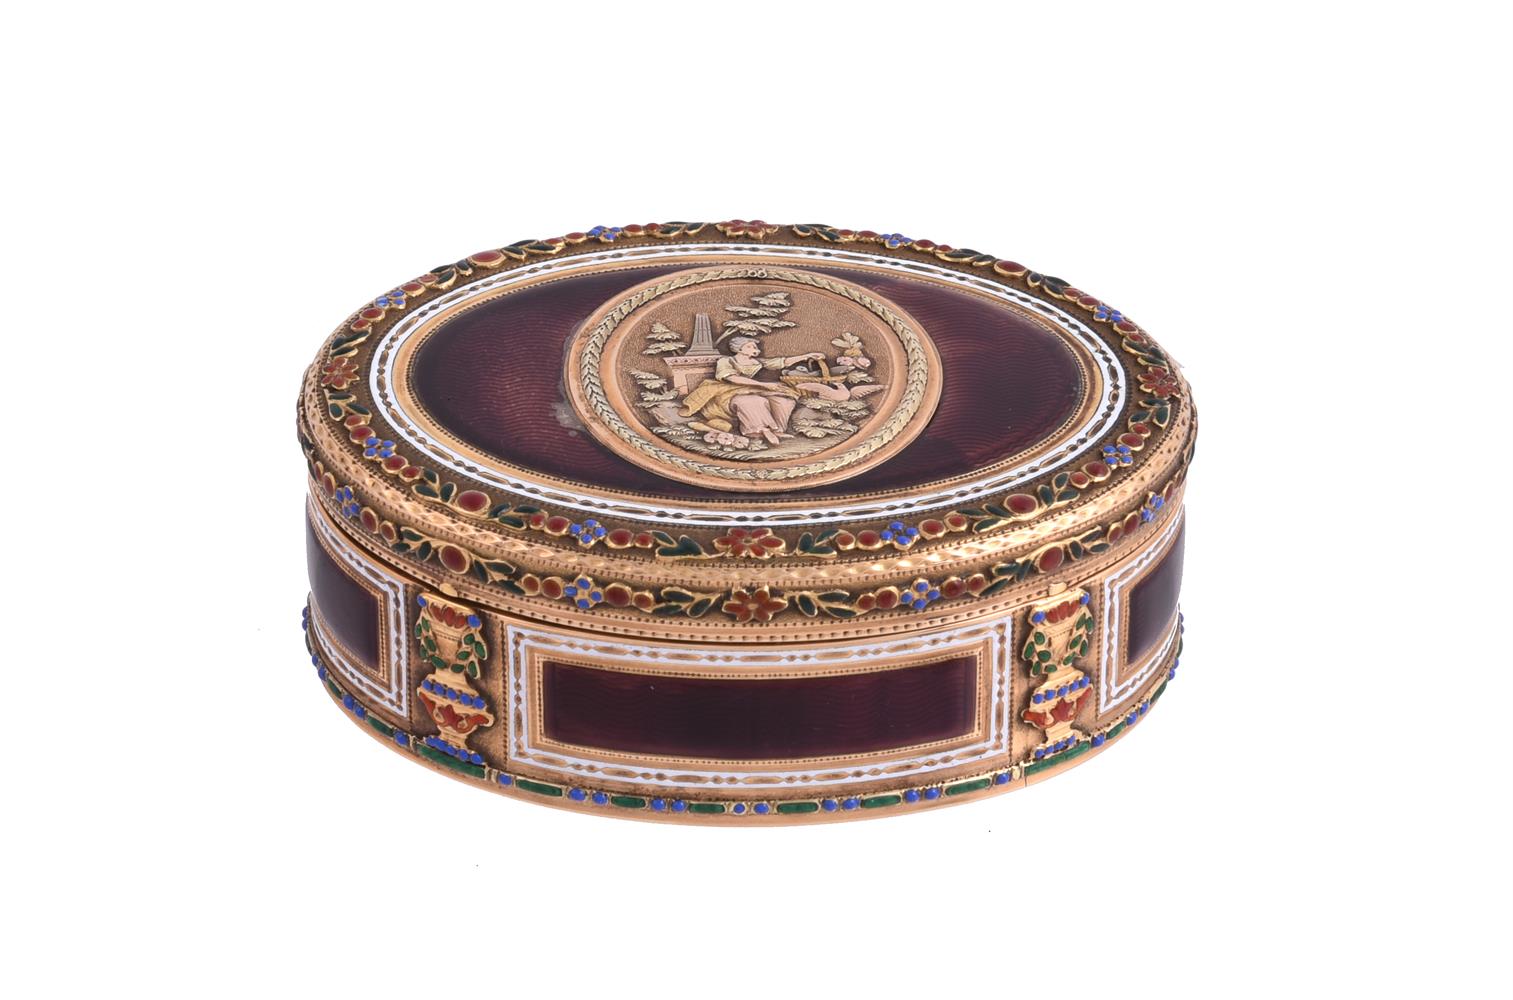 AN 18TH CENTURY GOLD AND ENAMEL OVAL BOX - Image 2 of 7